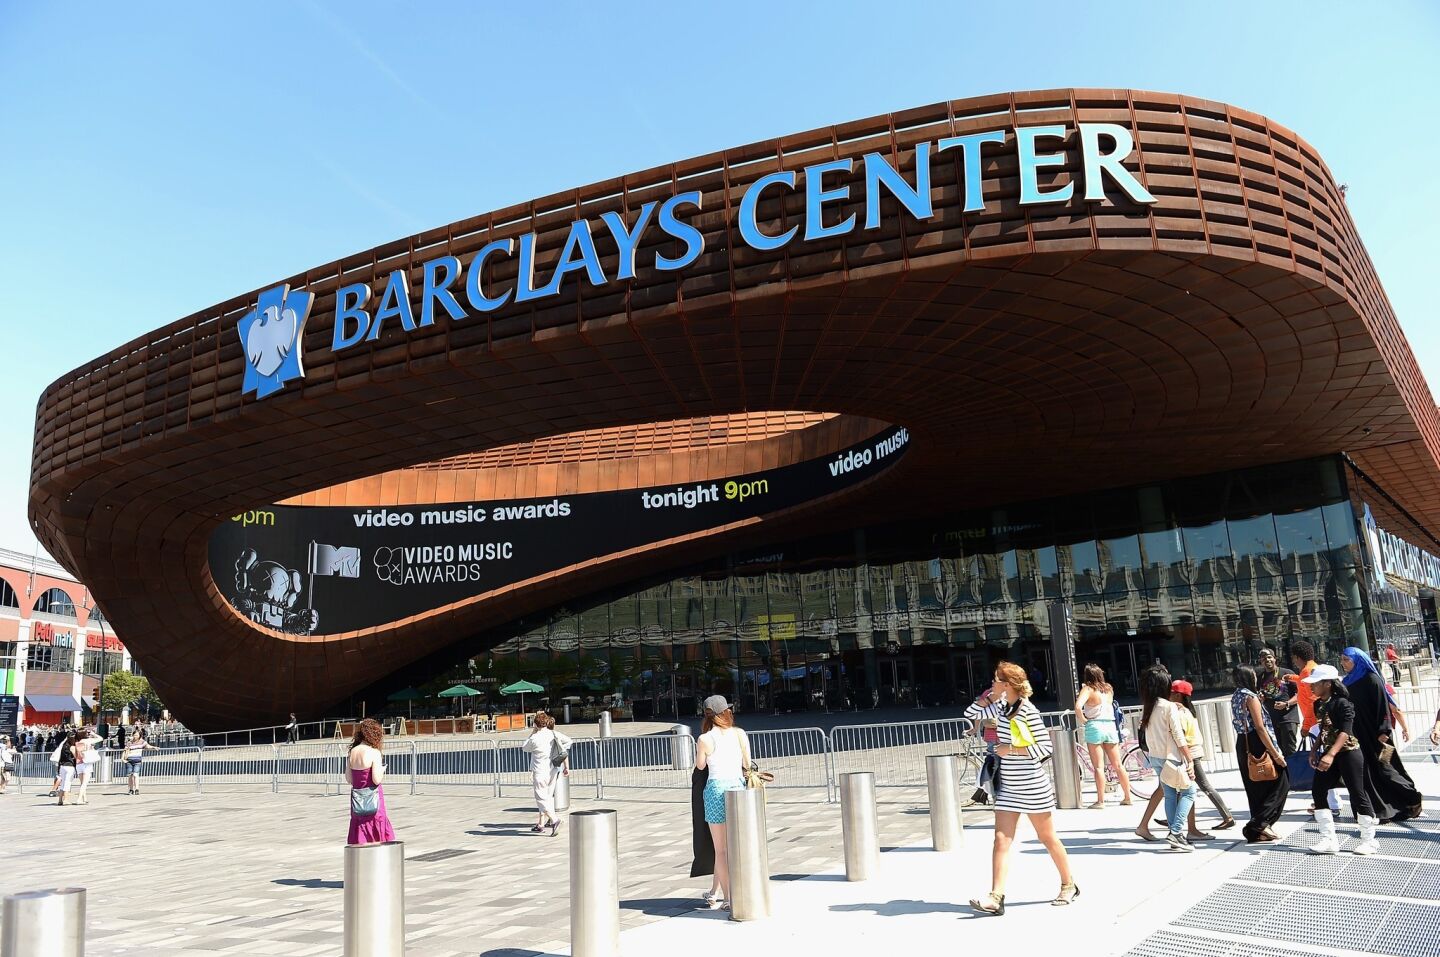 The Barclays Center in Brooklyn plays host to the MTV Video Music Awards.